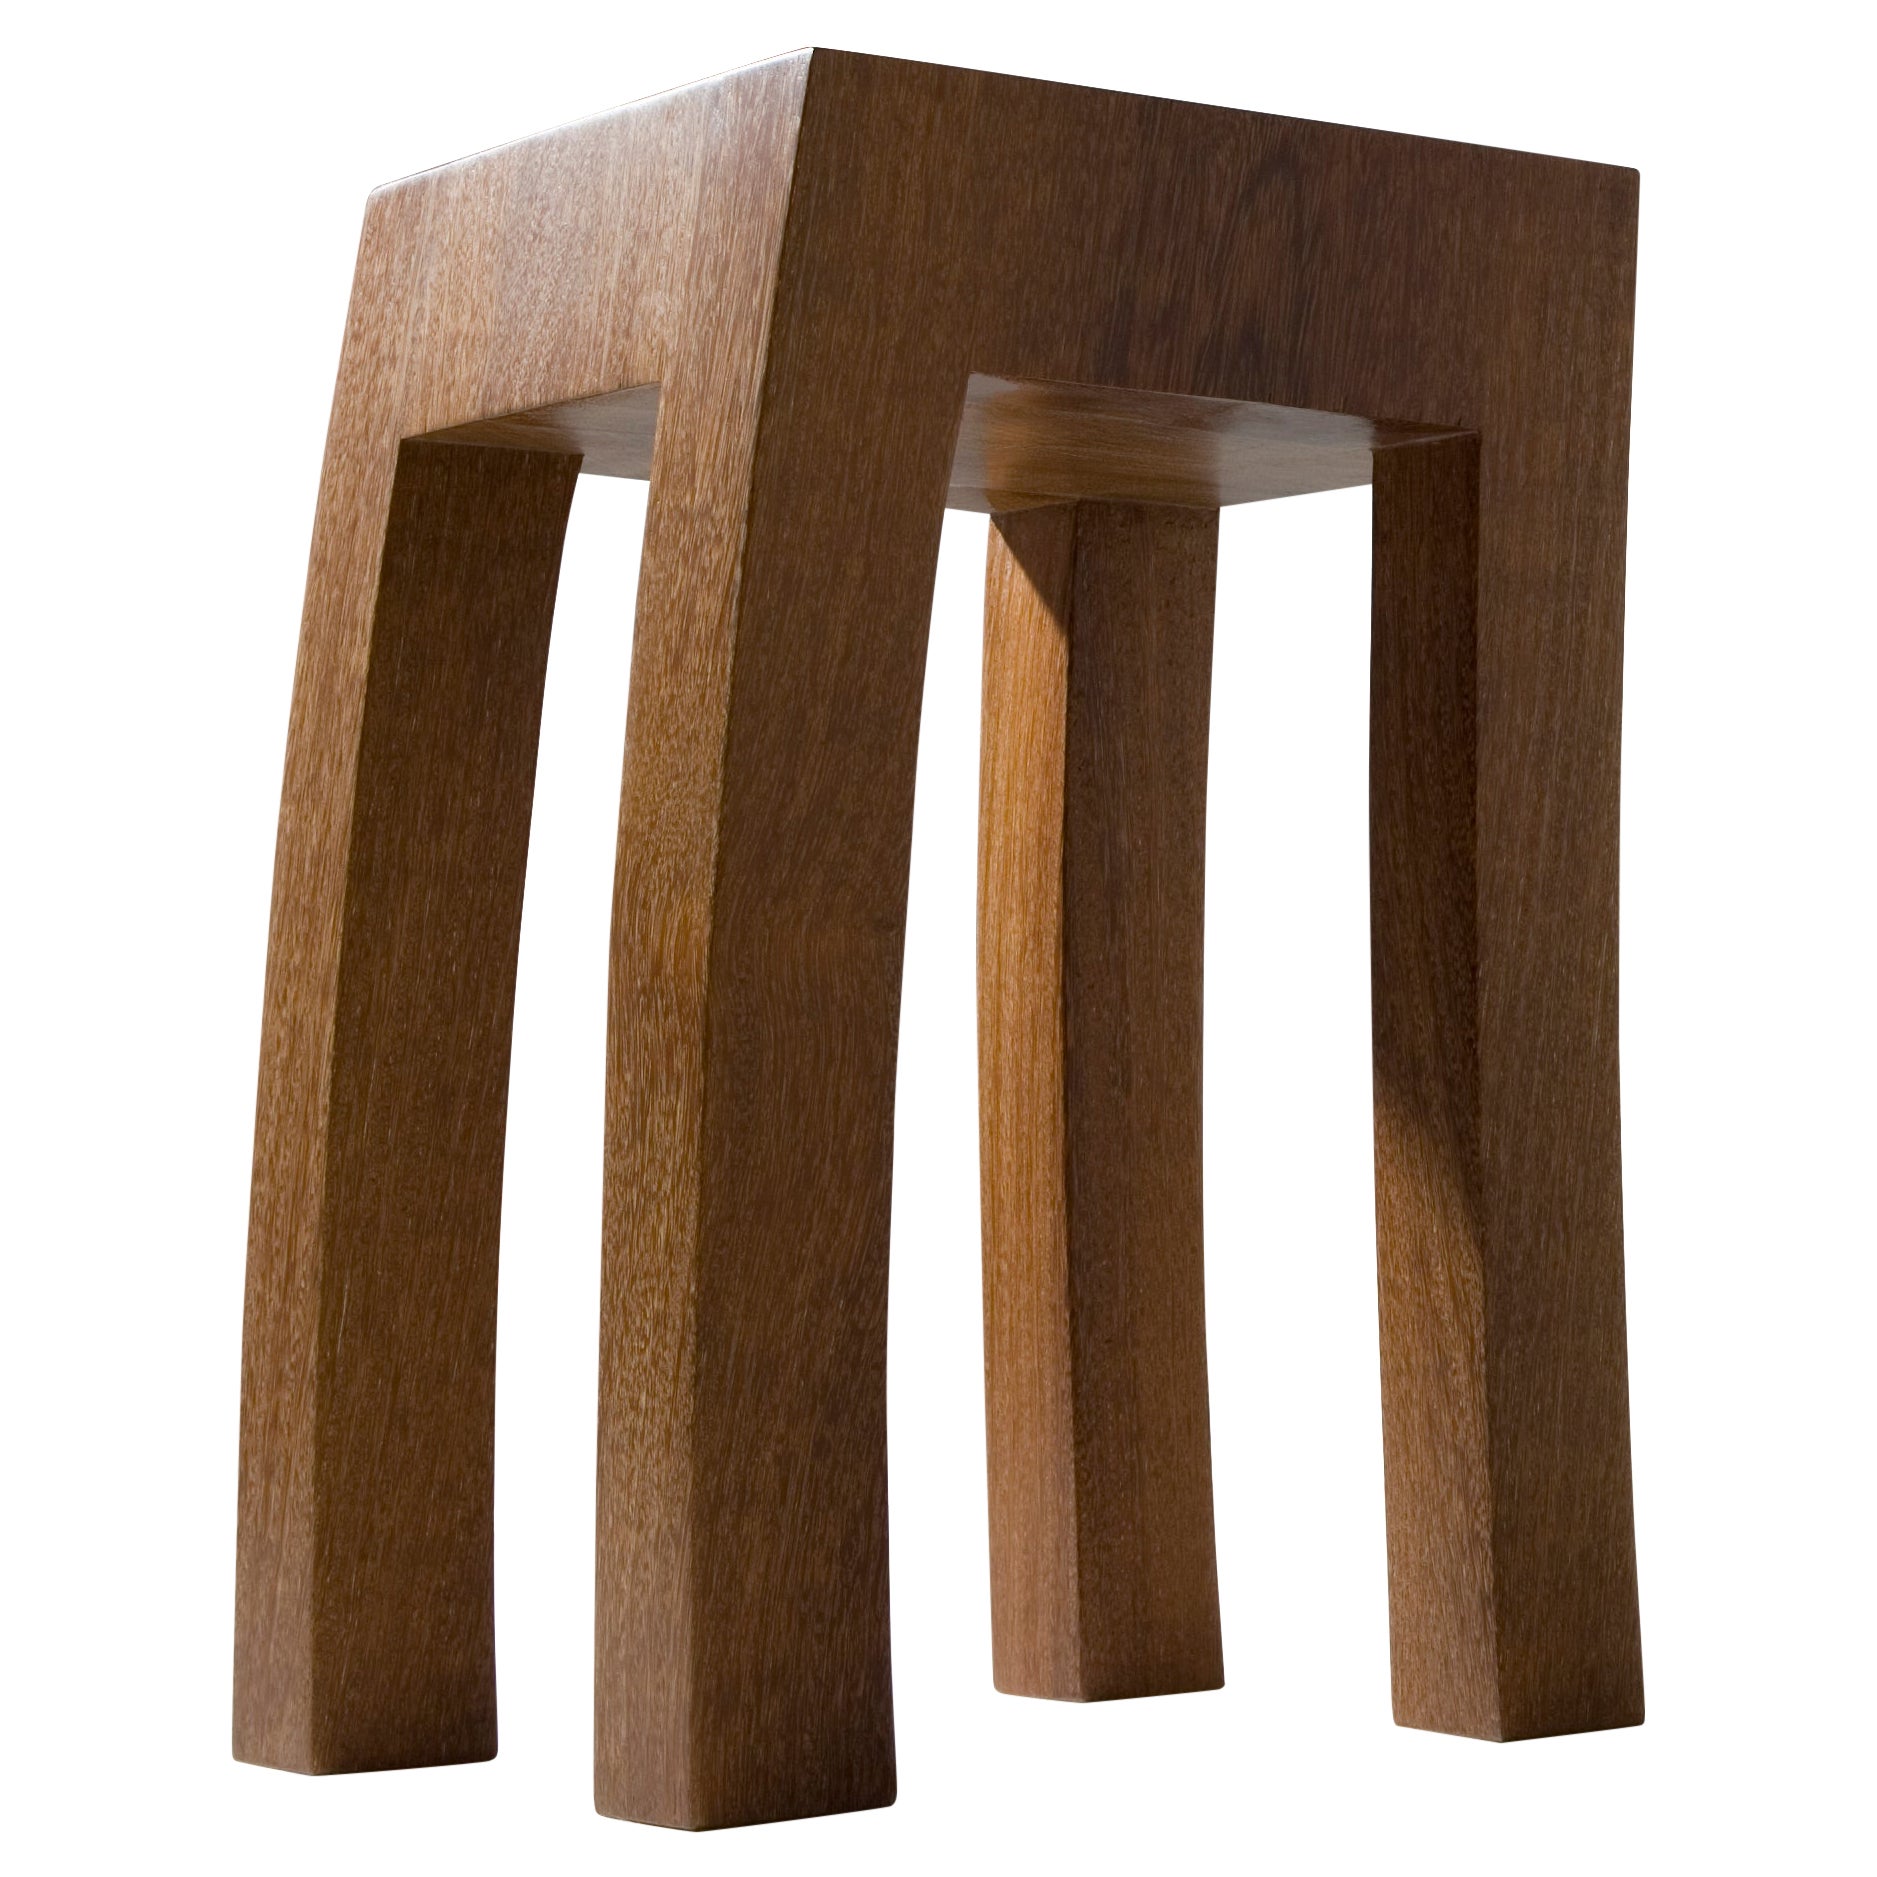  Movement Stool For Sale